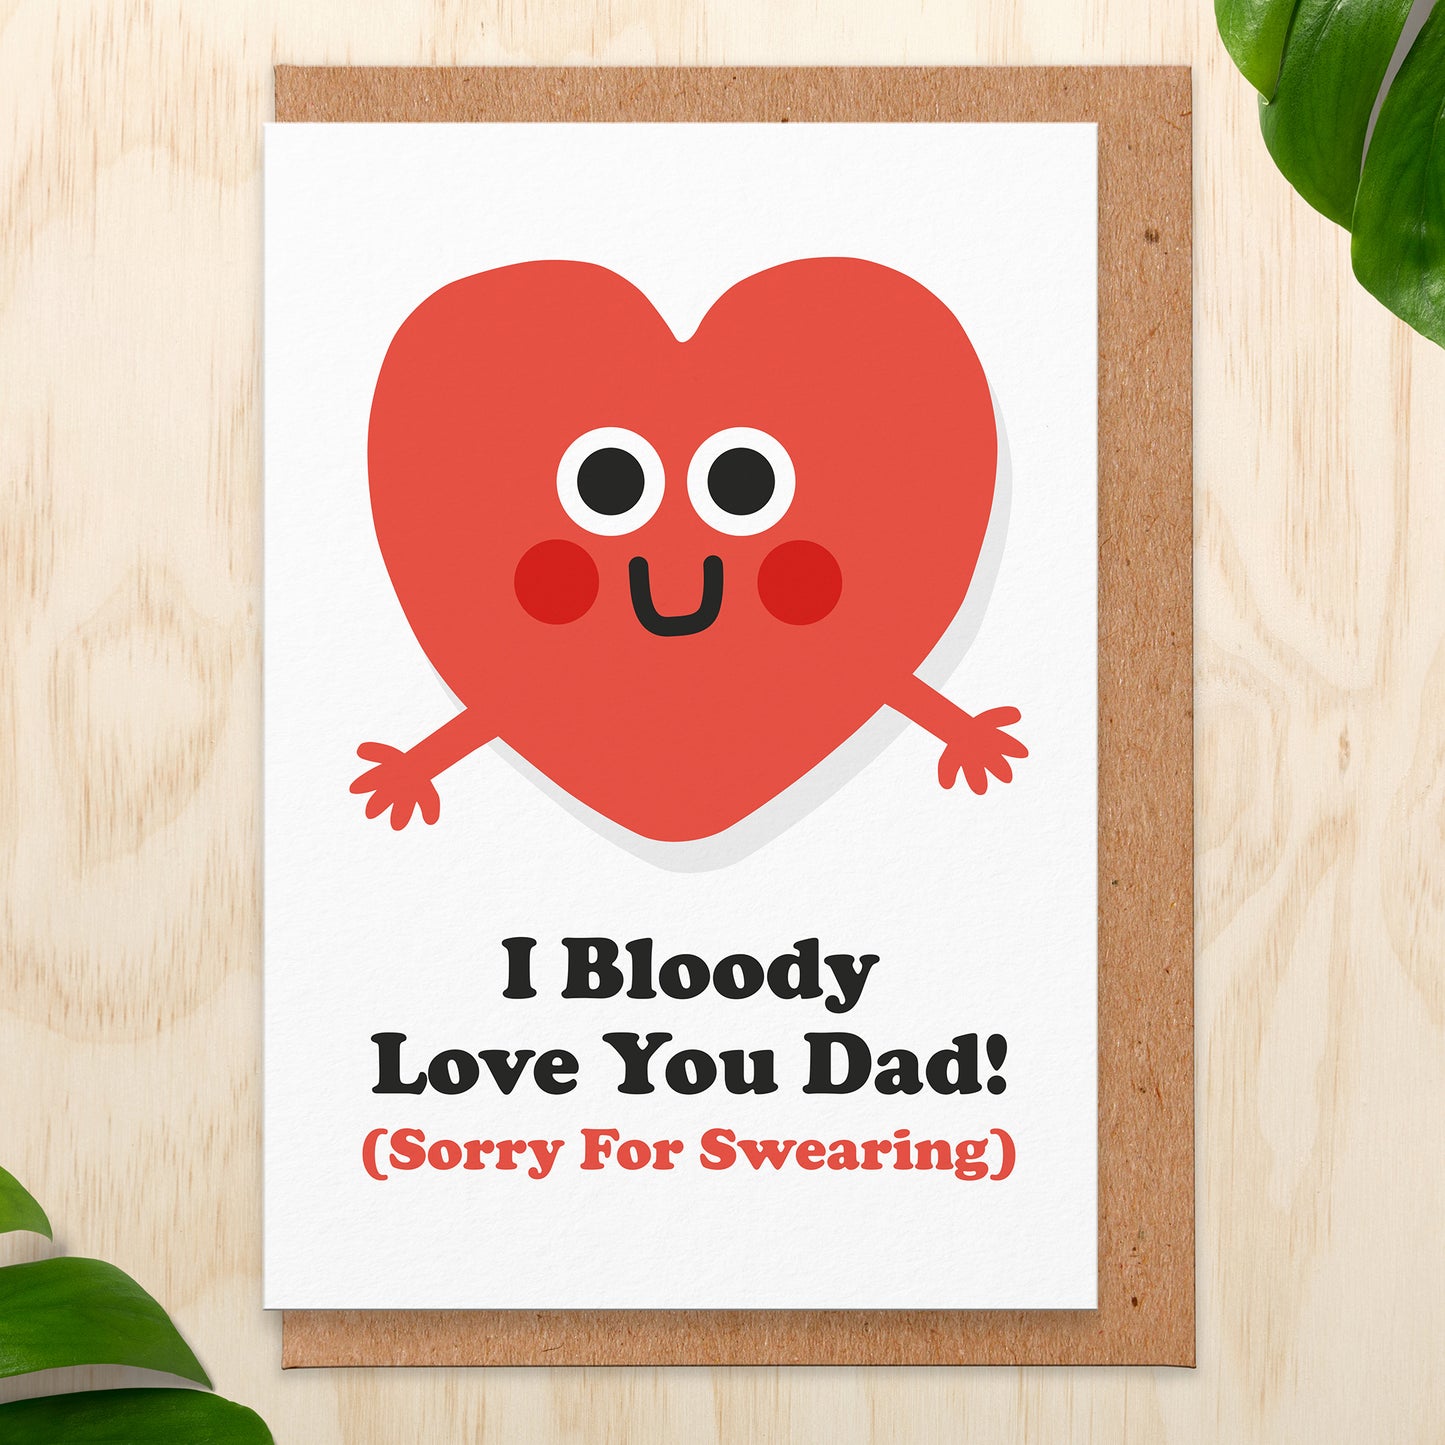 Father's Day card with an illustration of a red  heart with arms and a smiley face and reads I Bloody Love You Dad! (Sorry For Swearing)